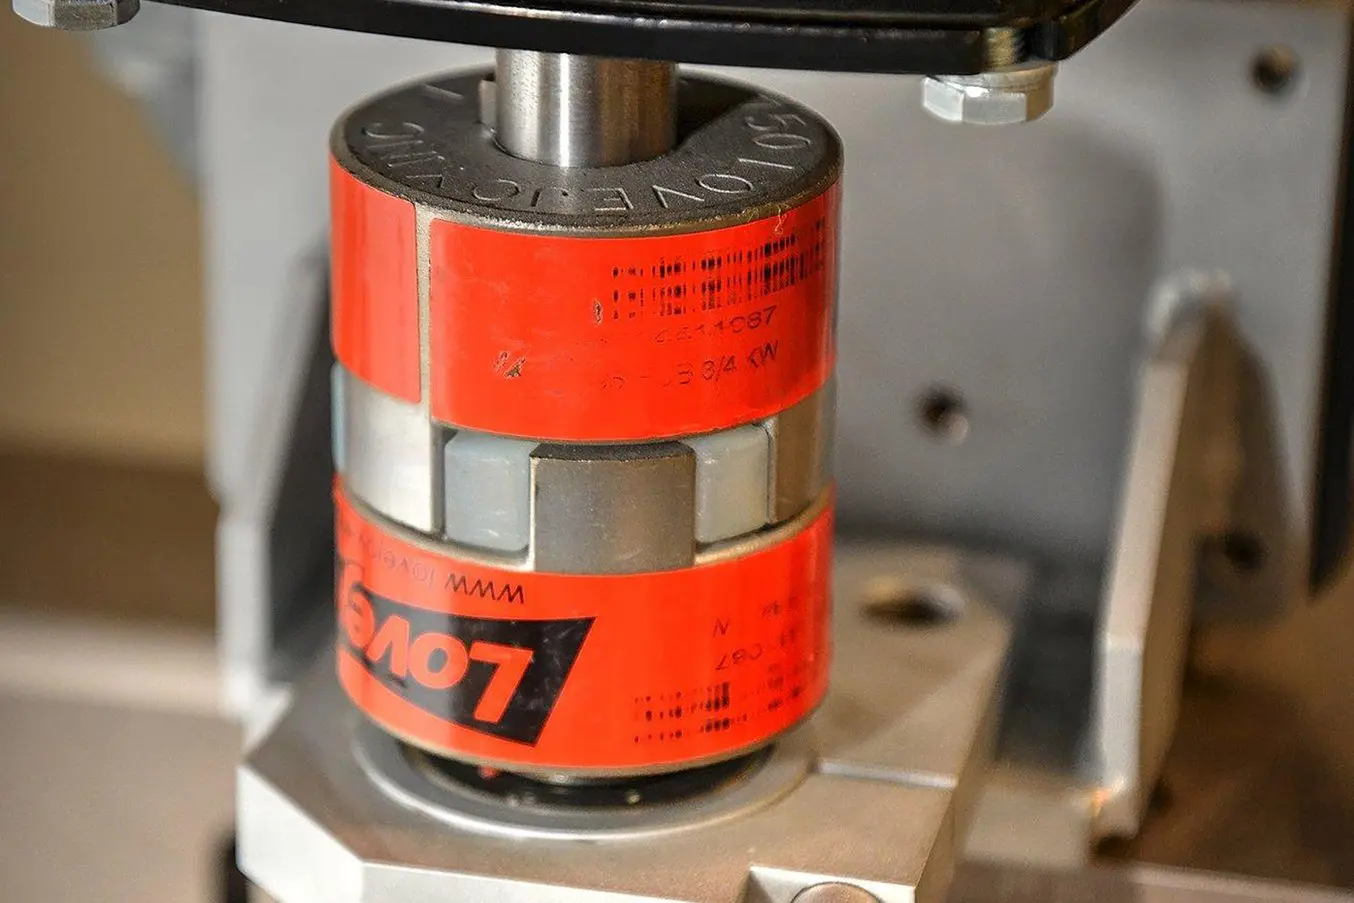 A lens polishing machine with a 3D printed spider coupling replacement part.